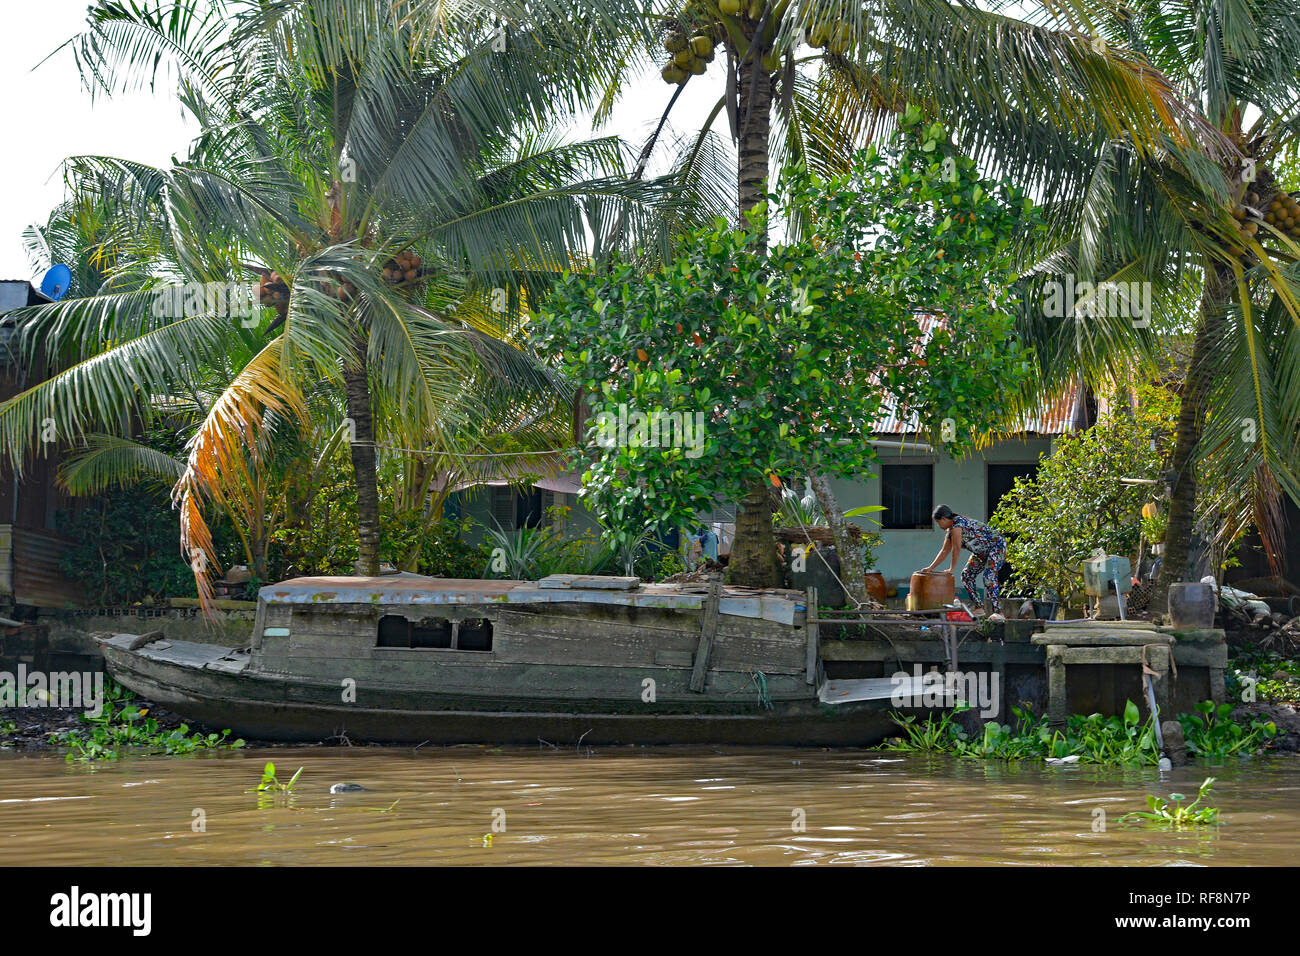 Can Tho; Vietnam - December 31st 2017. A boat moored outside a house in the Mekong Delta. A woman moves some large pots on shore in the background Stock Photo